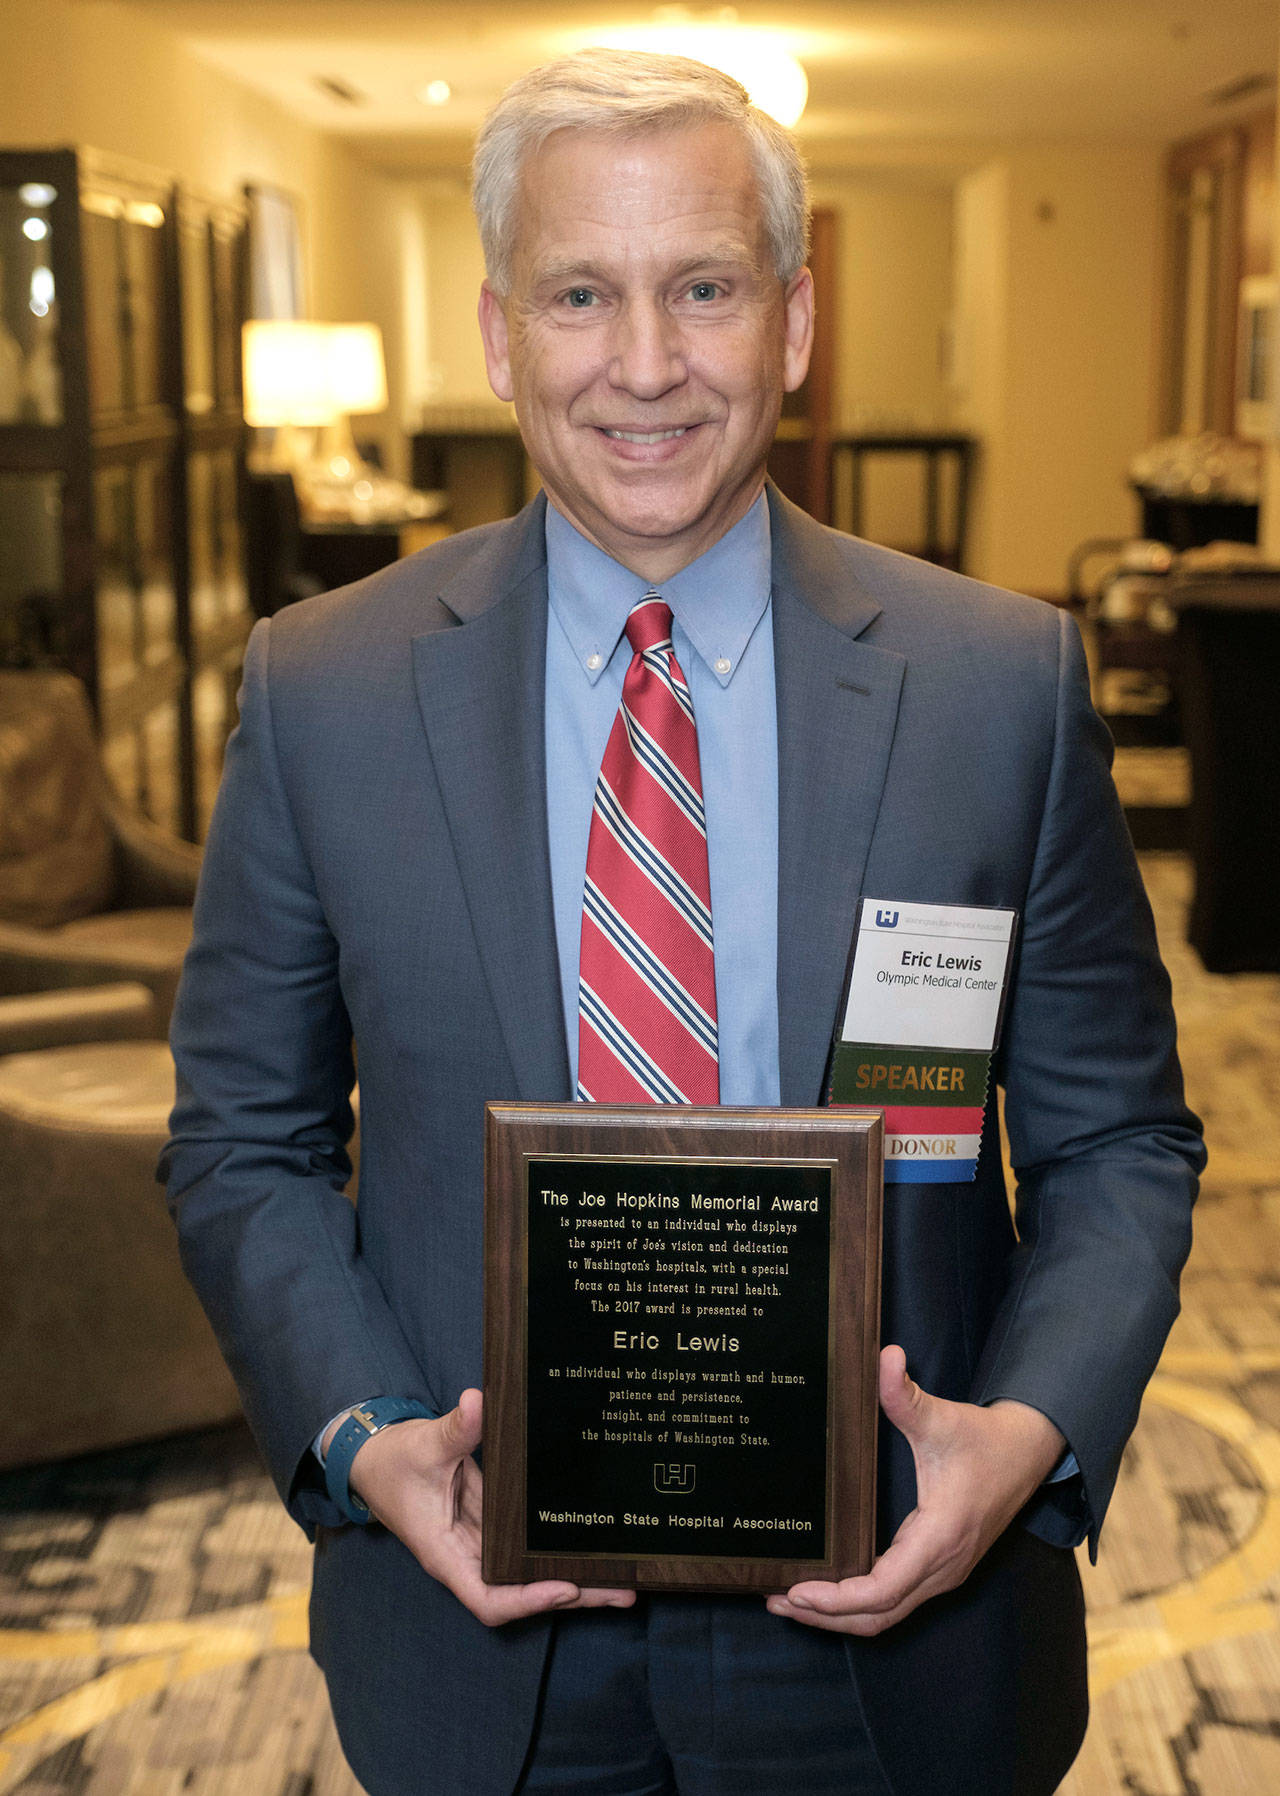 The Washington State Hospital Association presented Eric Lewis, CEO of Olympic Medical Center, with the Joe Hopkins Memorial Award on Oct 12. (Bobby Beeman)